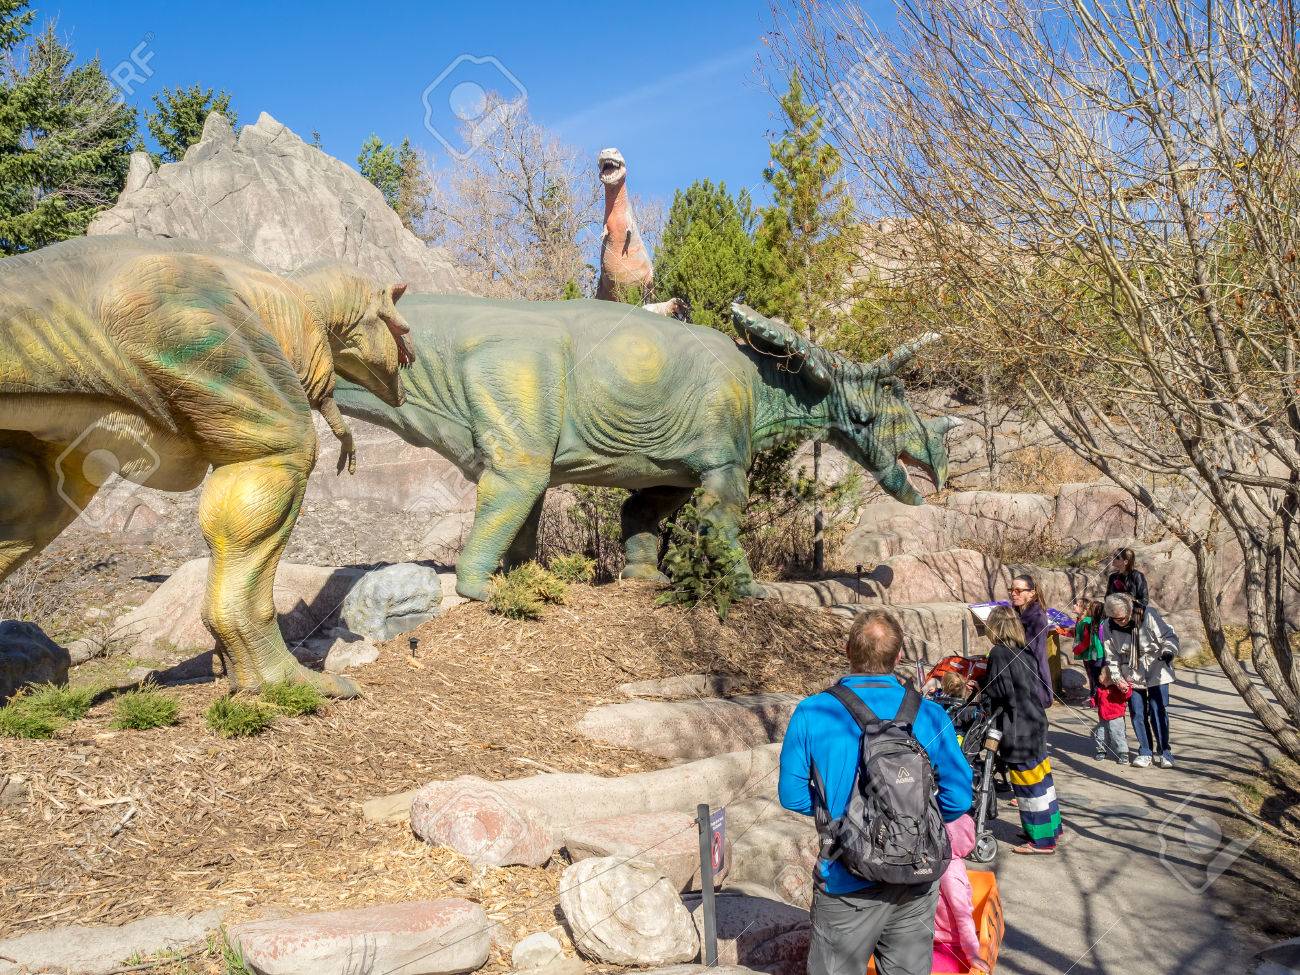 38953144-animatronic-dinosaurs-exhibits-at-the-prehistoric-park-section-of-the-calgary-zoo-on-...jpg